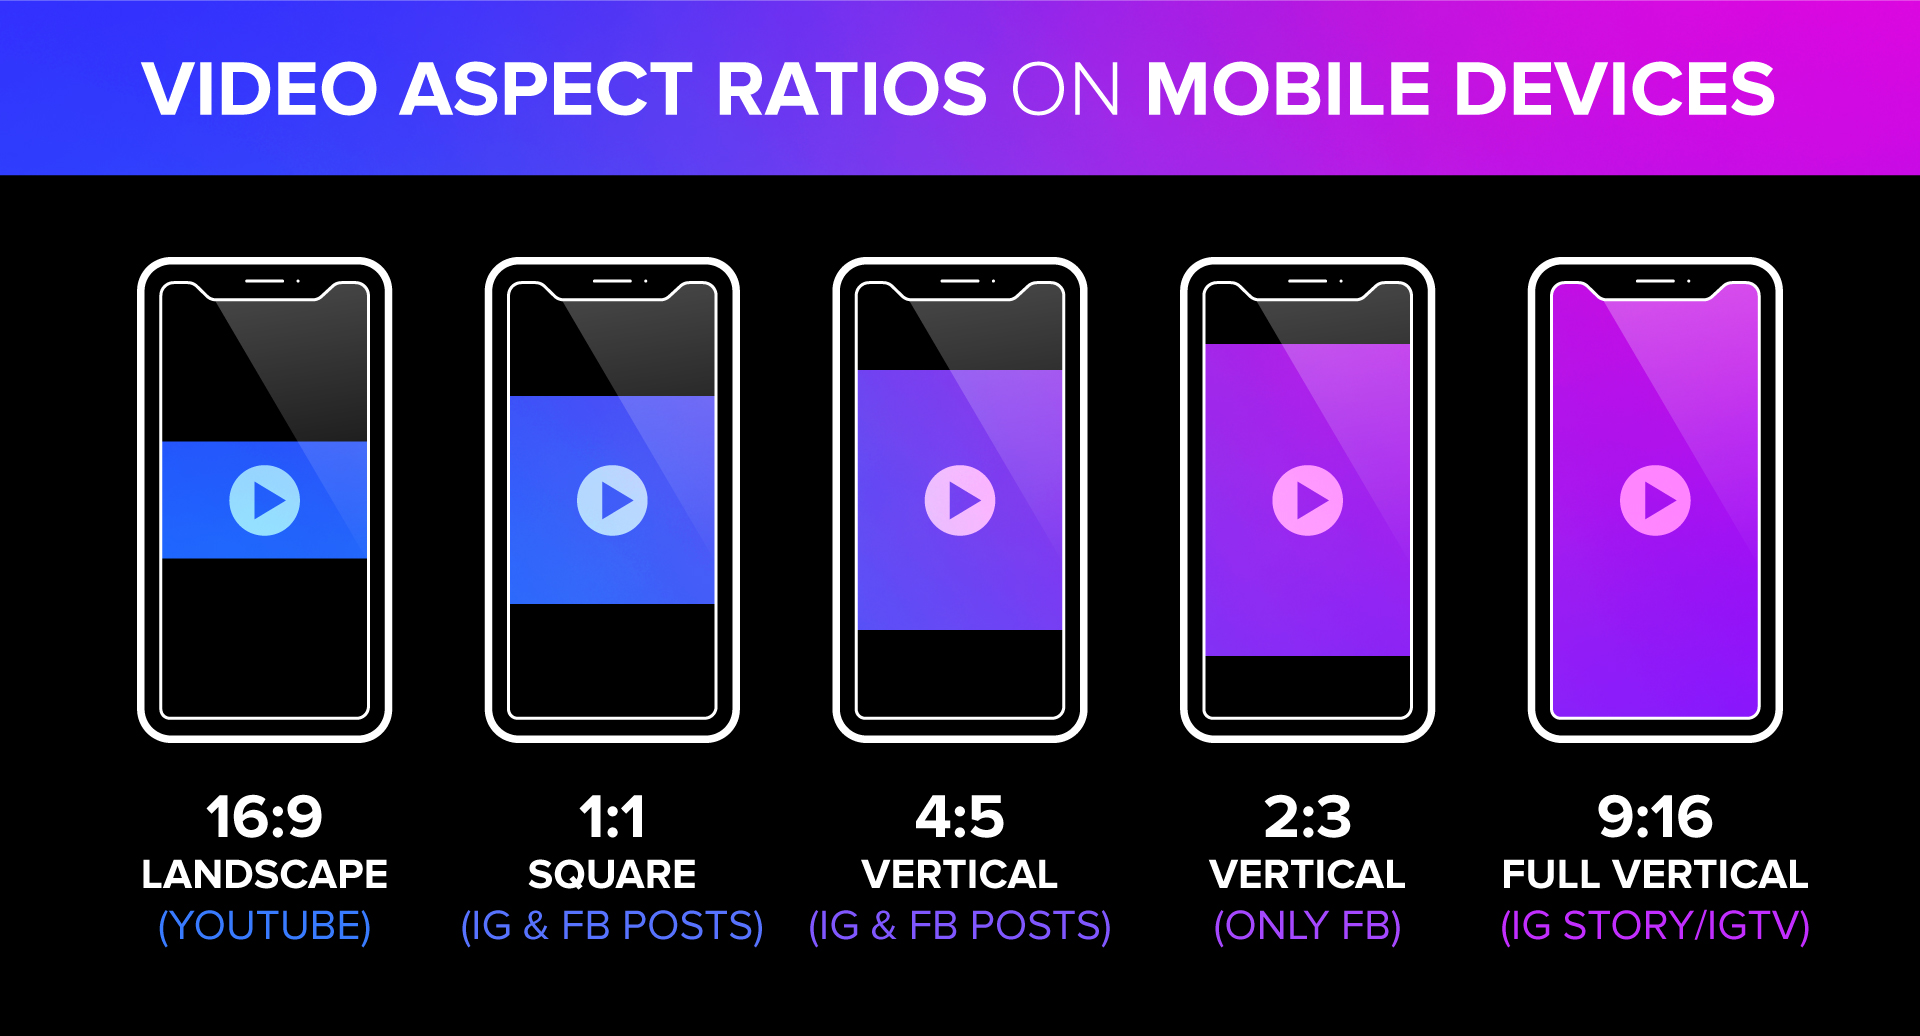 Infographic of video aspect ratios on mobile devices. Include 16:9 landscape for YouTube, 1:1 square for Instagram and Facebook, 4:5 vertical for Instagram and Facebook, 2:3 vertical for Facebook, and 9:16 full vertical for Instagram Story and IGTV